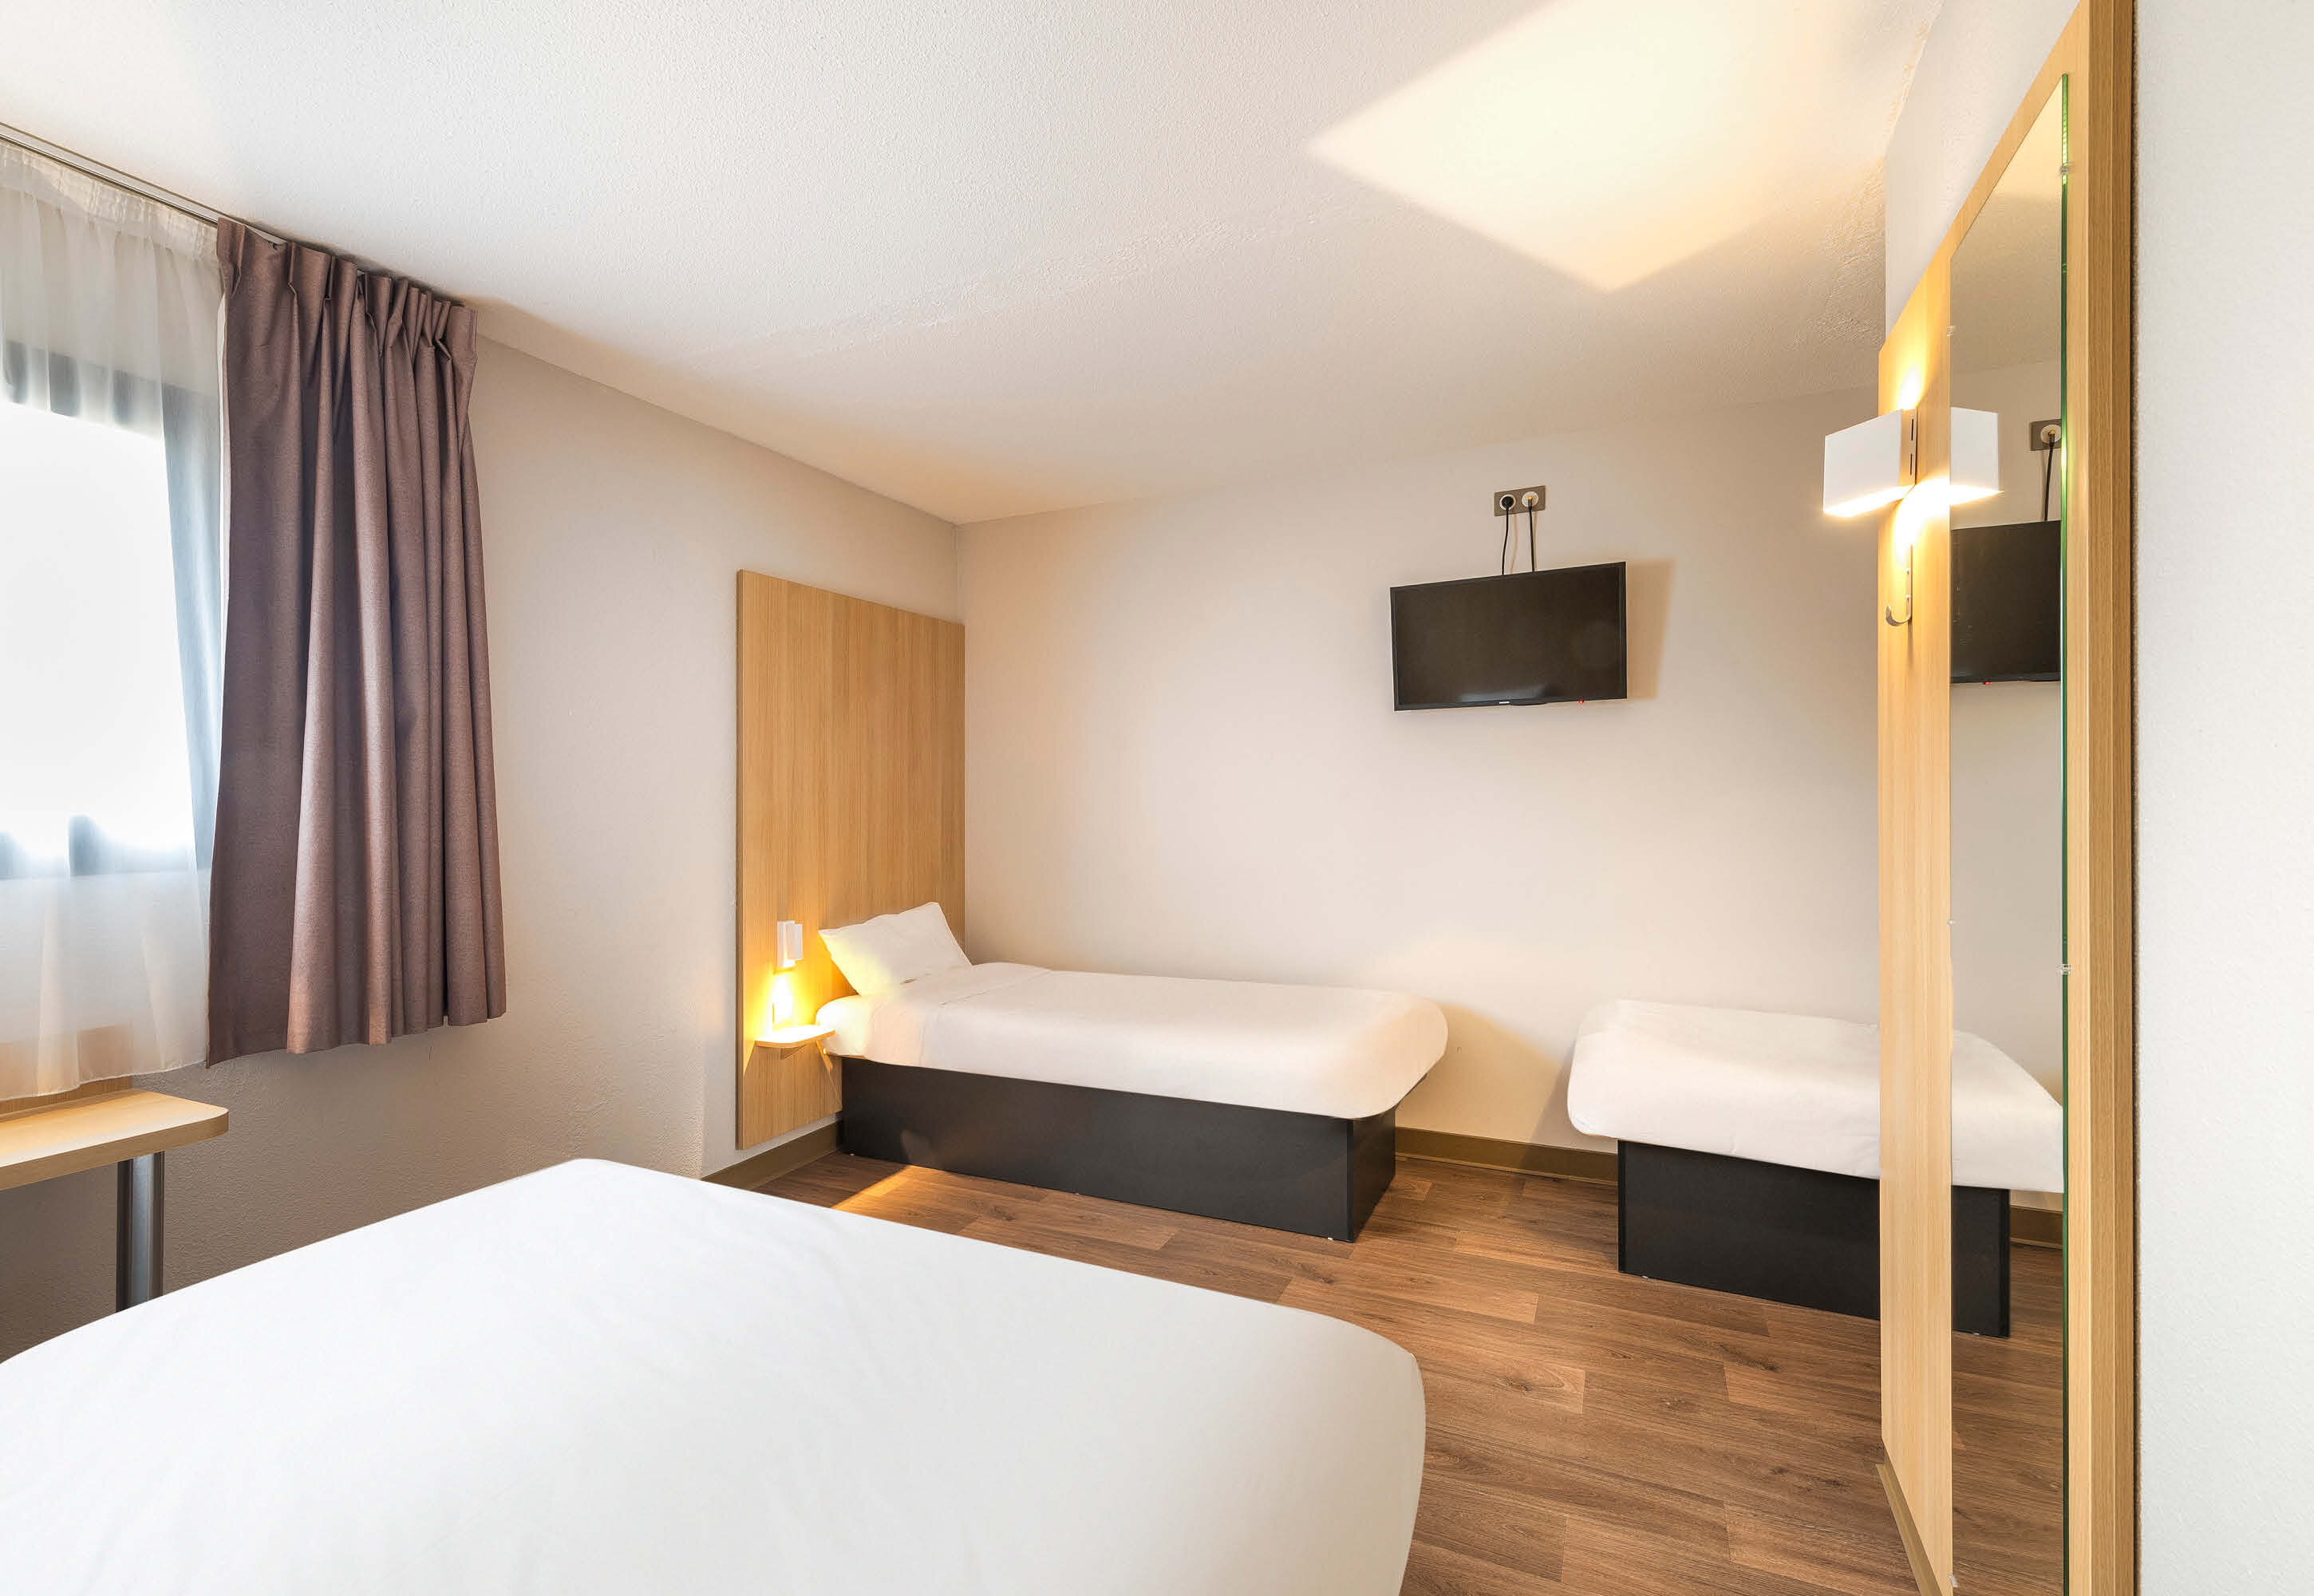 Images B&B HOTEL Angers Parc Expos